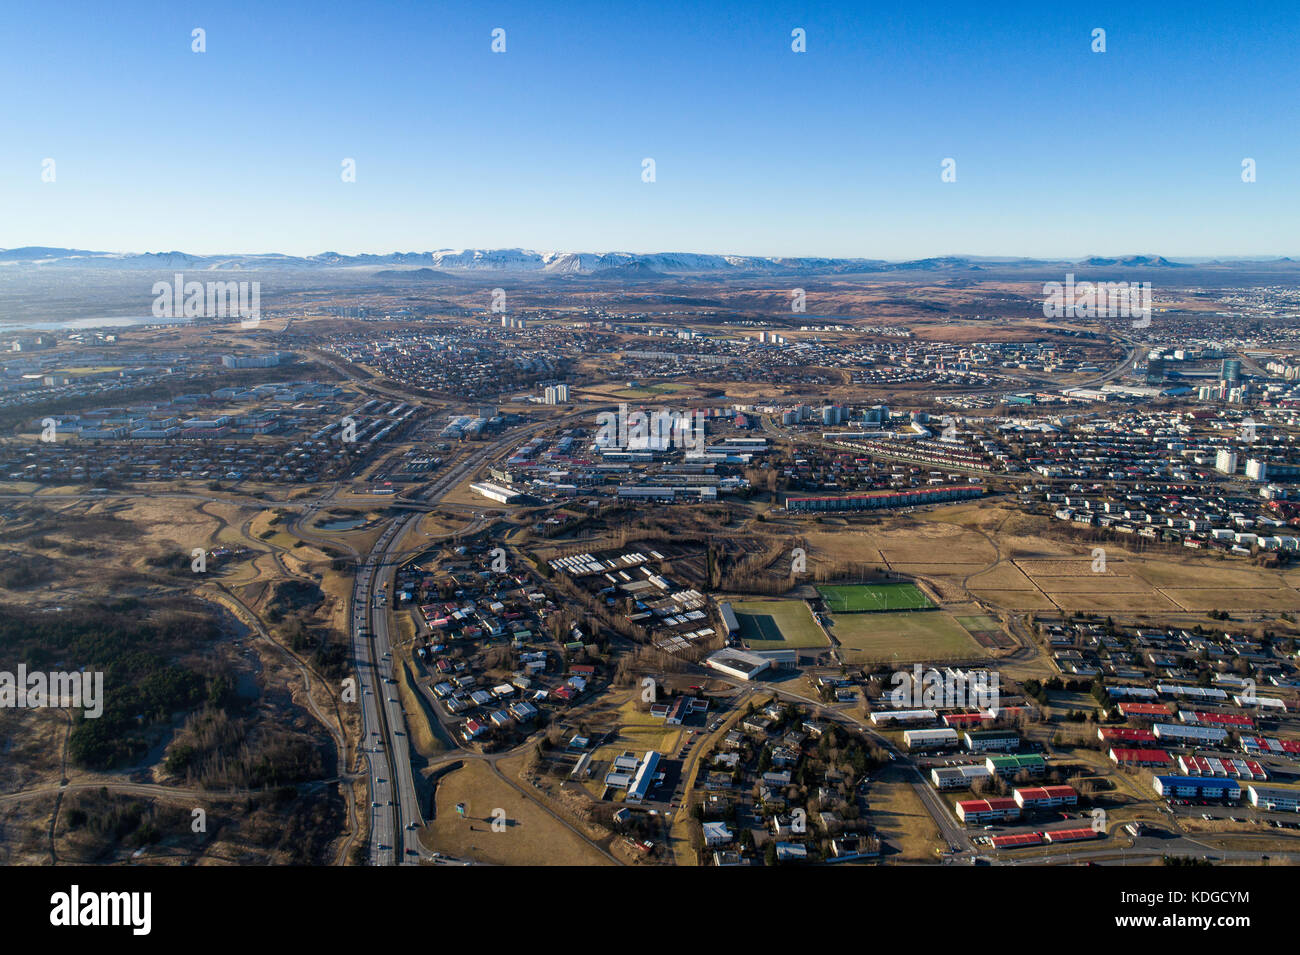 Aerial photograph overlooking Kopavogur town, a suburb of Reykjavik, the capital of Iceland. Mountains in background shot on a sunny day Stock Photo